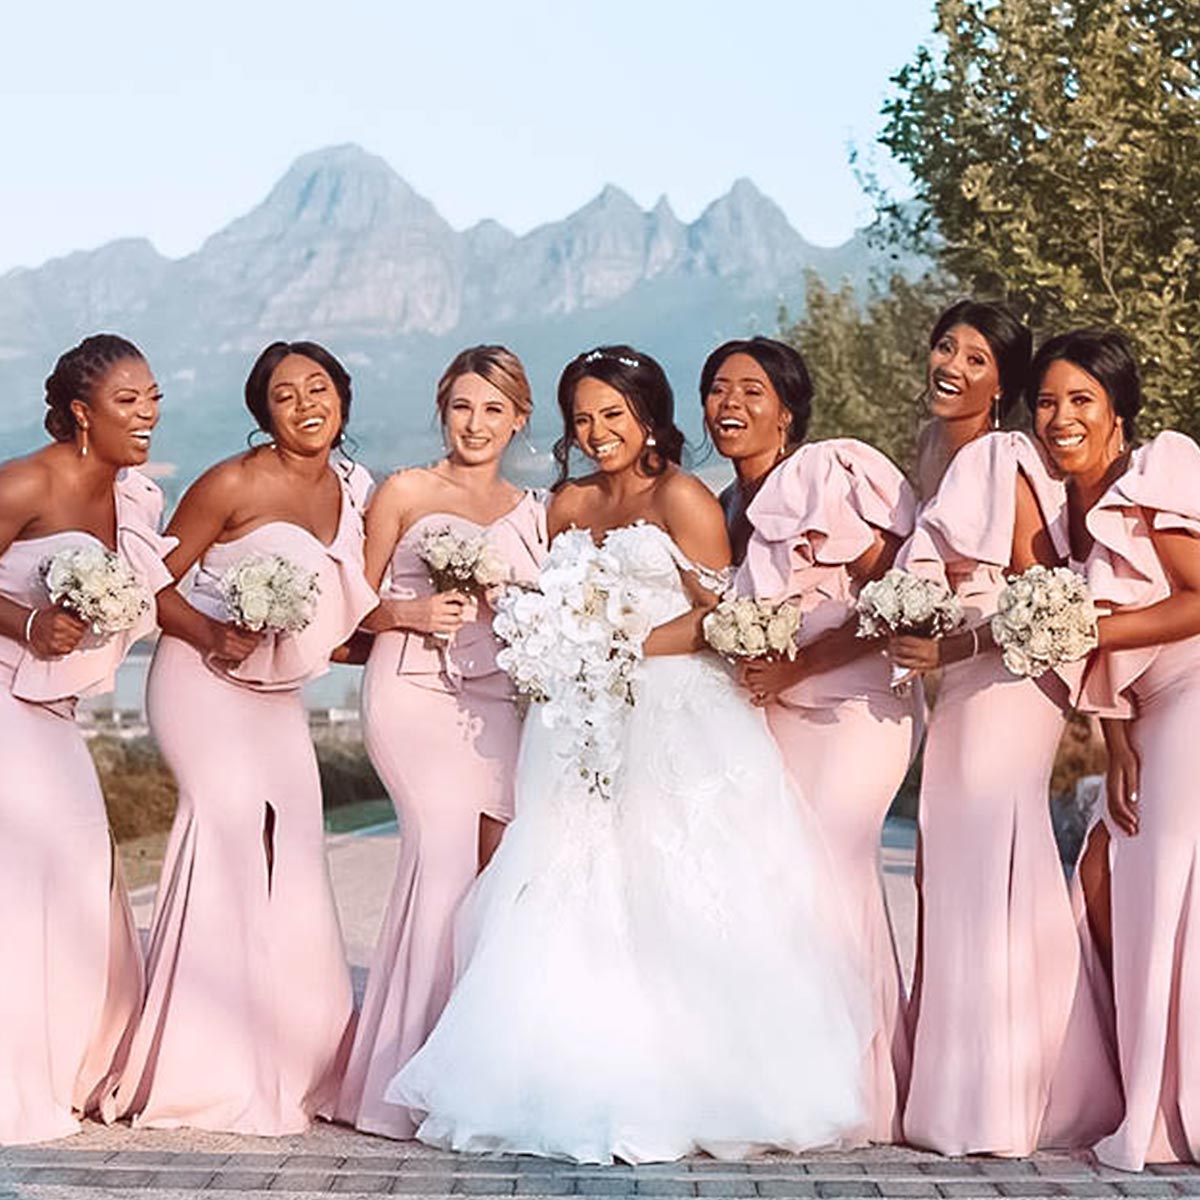 Bride with bridesmaids in matching blush pink dresses holding elegant bouquets against a mountain backdrop, showcasing wedding floral designs. Fabulous Flowers and Gifts.